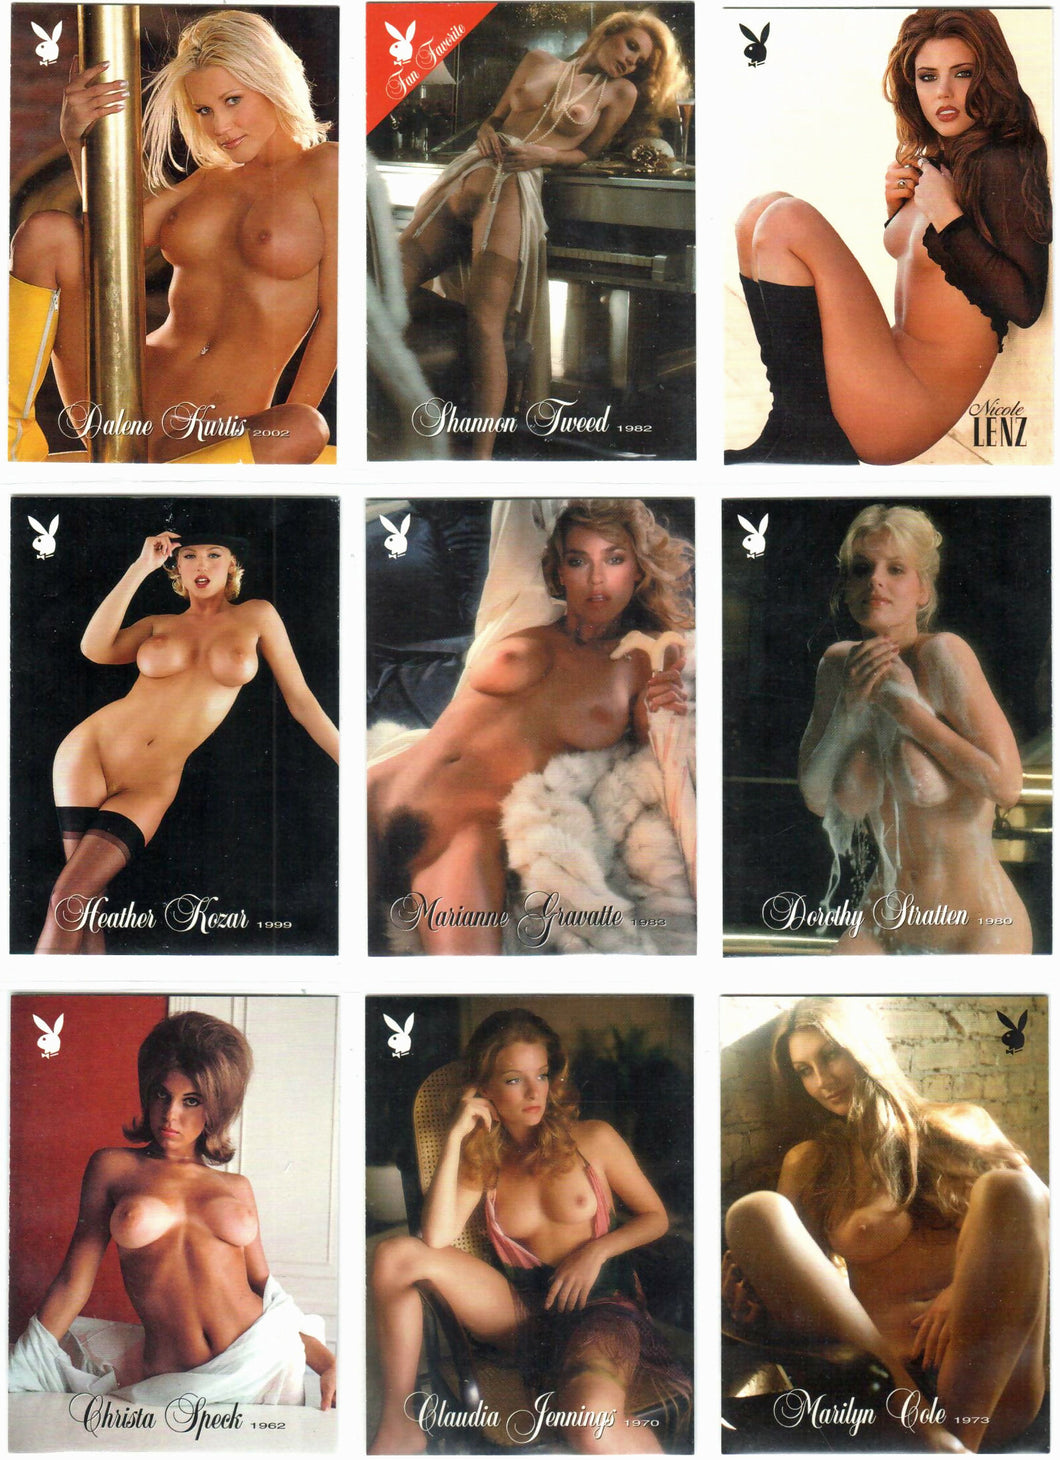 Playboy's Playmate of the Year - Complete common set [100 cards total]